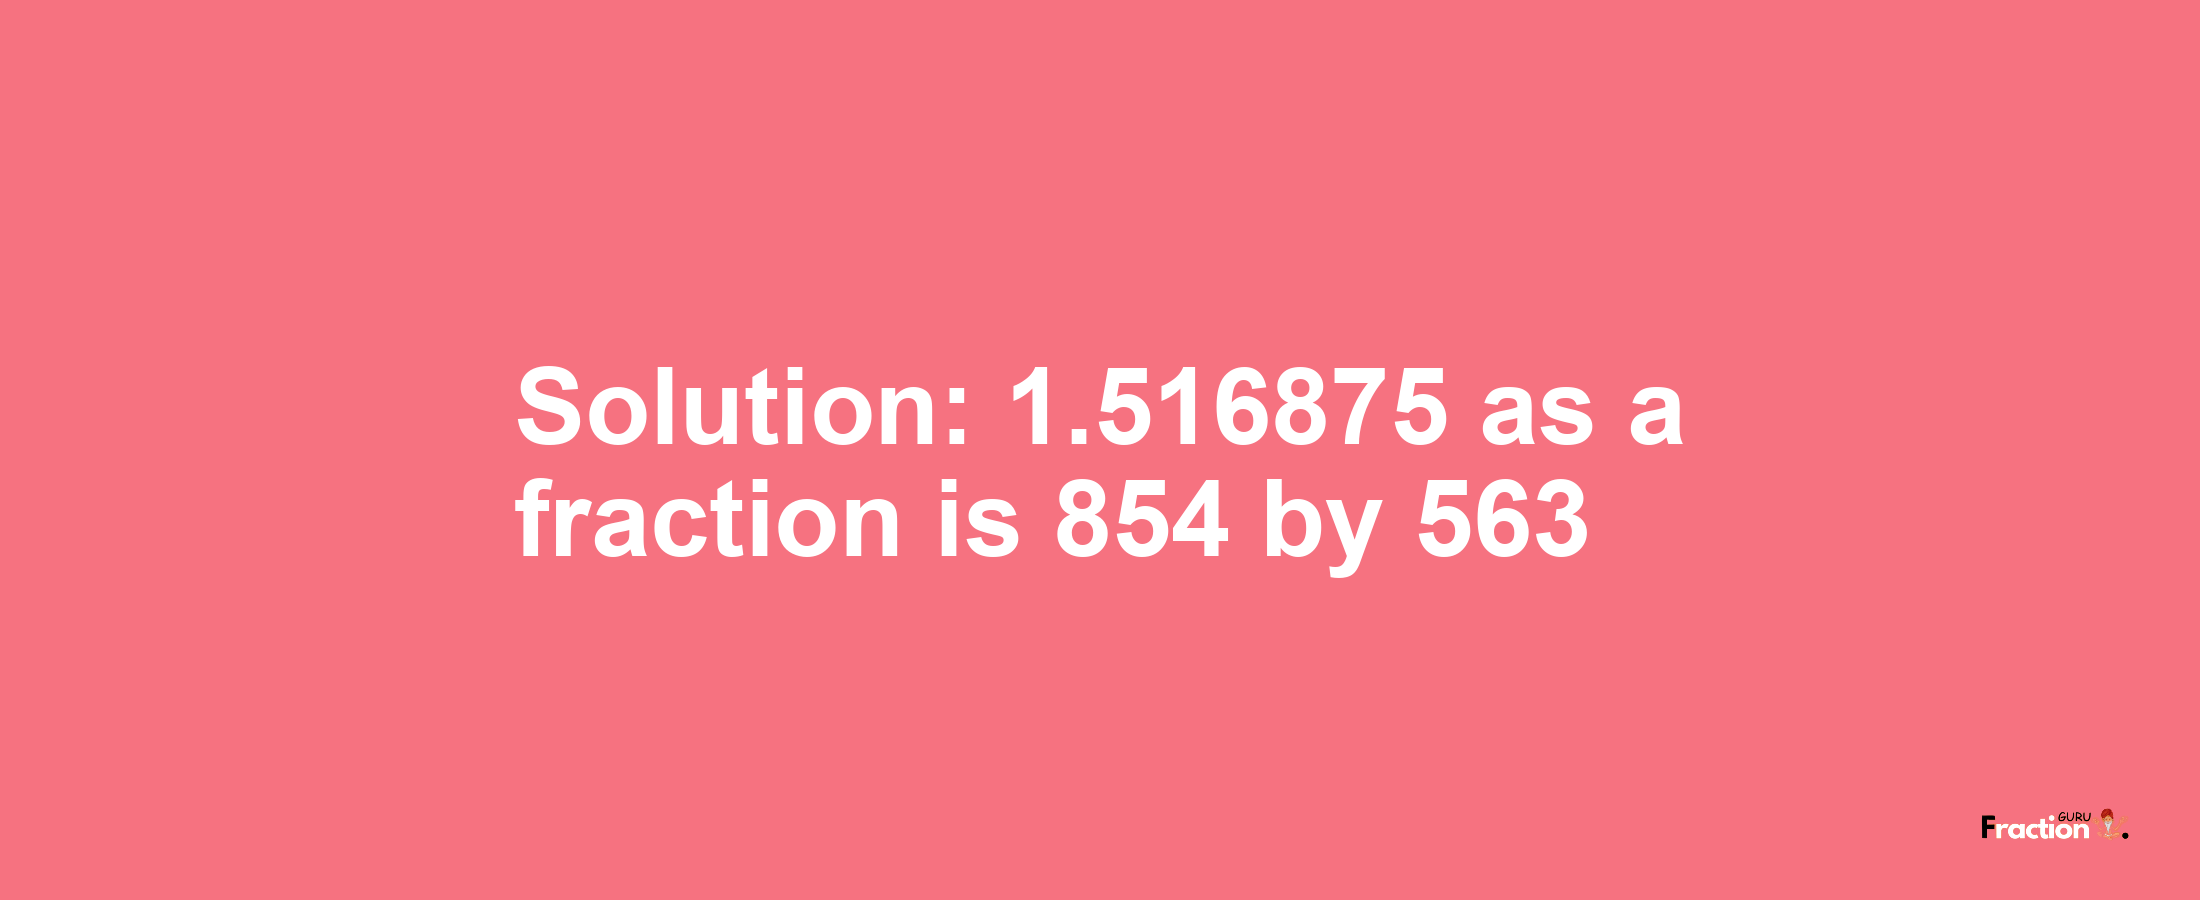 Solution:1.516875 as a fraction is 854/563